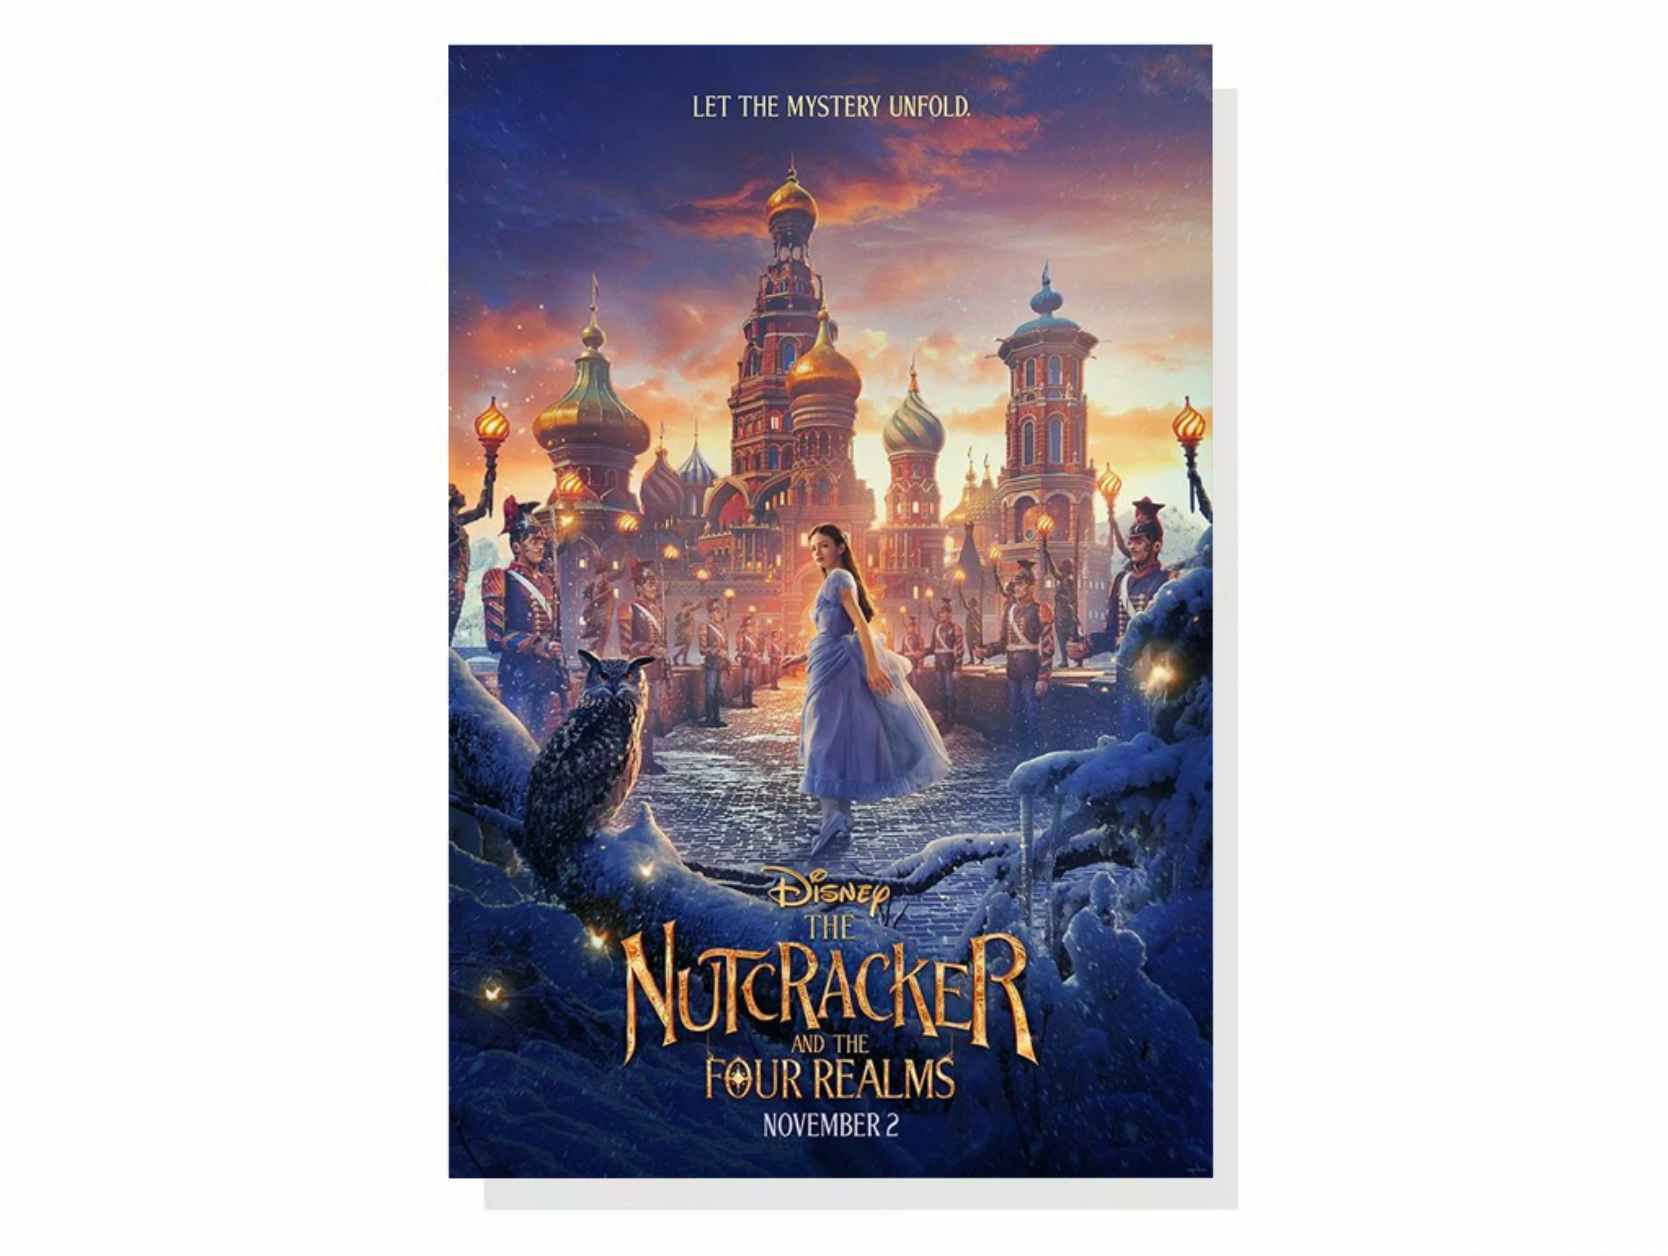 Movie poster for Nutcracker and the Four Realms, one of the best Christmas movies on Disney Plus.